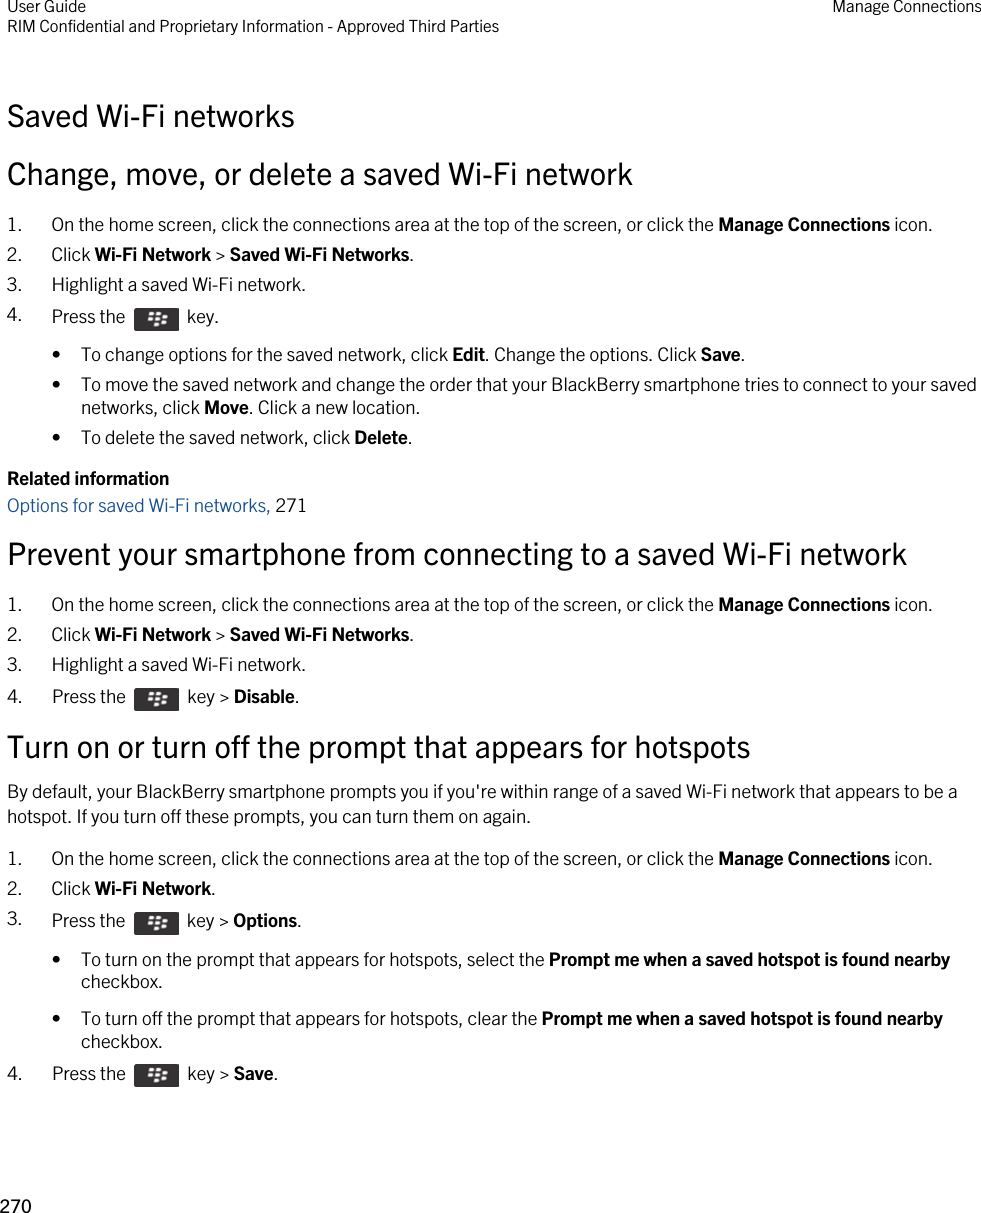 Saved Wi-Fi networksChange, move, or delete a saved Wi-Fi network1. On the home screen, click the connections area at the top of the screen, or click the Manage Connections icon.2. Click Wi-Fi Network &gt; Saved Wi-Fi Networks.3. Highlight a saved Wi-Fi network.4. Press the    key. • To change options for the saved network, click Edit. Change the options. Click Save.• To move the saved network and change the order that your BlackBerry smartphone tries to connect to your saved networks, click Move. Click a new location.• To delete the saved network, click Delete.Related informationOptions for saved Wi-Fi networks, 271Prevent your smartphone from connecting to a saved Wi-Fi network1. On the home screen, click the connections area at the top of the screen, or click the Manage Connections icon.2. Click Wi-Fi Network &gt; Saved Wi-Fi Networks.3. Highlight a saved Wi-Fi network.4.  Press the    key &gt; Disable. Turn on or turn off the prompt that appears for hotspotsBy default, your BlackBerry smartphone prompts you if you&apos;re within range of a saved Wi-Fi network that appears to be a hotspot. If you turn off these prompts, you can turn them on again.1. On the home screen, click the connections area at the top of the screen, or click the Manage Connections icon.2. Click Wi-Fi Network.3. Press the    key &gt; Options. • To turn on the prompt that appears for hotspots, select the Prompt me when a saved hotspot is found nearby checkbox.• To turn off the prompt that appears for hotspots, clear the Prompt me when a saved hotspot is found nearby checkbox.4.  Press the    key &gt; Save. User GuideRIM Confidential and Proprietary Information - Approved Third Parties Manage Connections270 